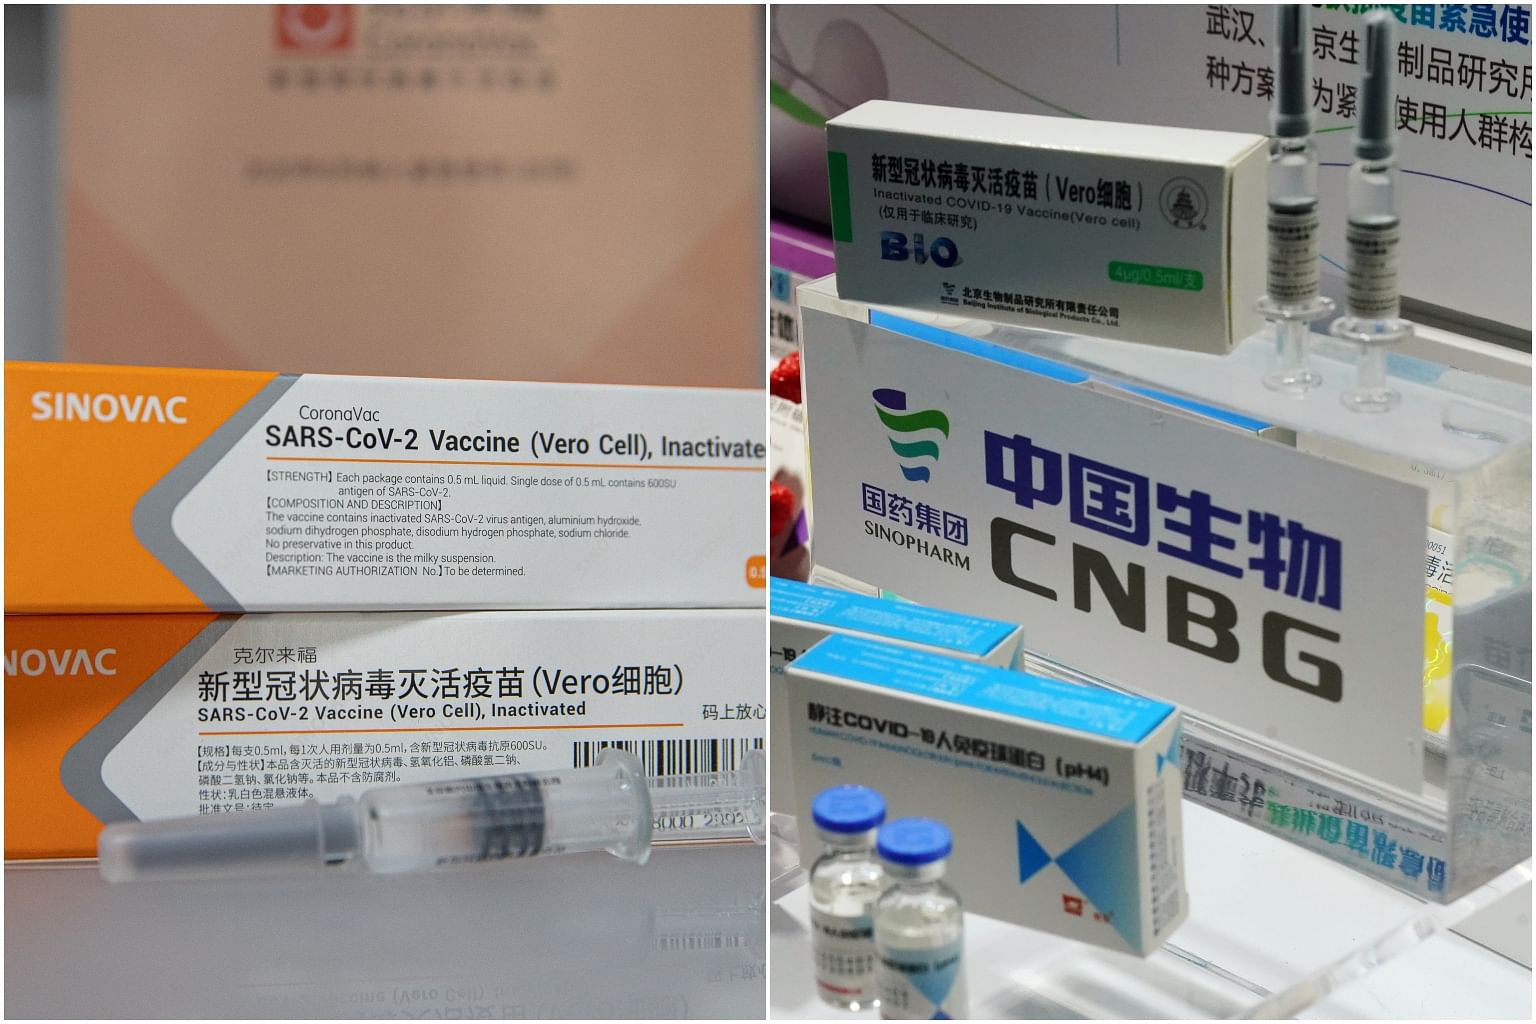 China S Cnbg Sinovac Find More Countries To Test Coronavirus Vaccines East Asia News Top Stories The Straits Times